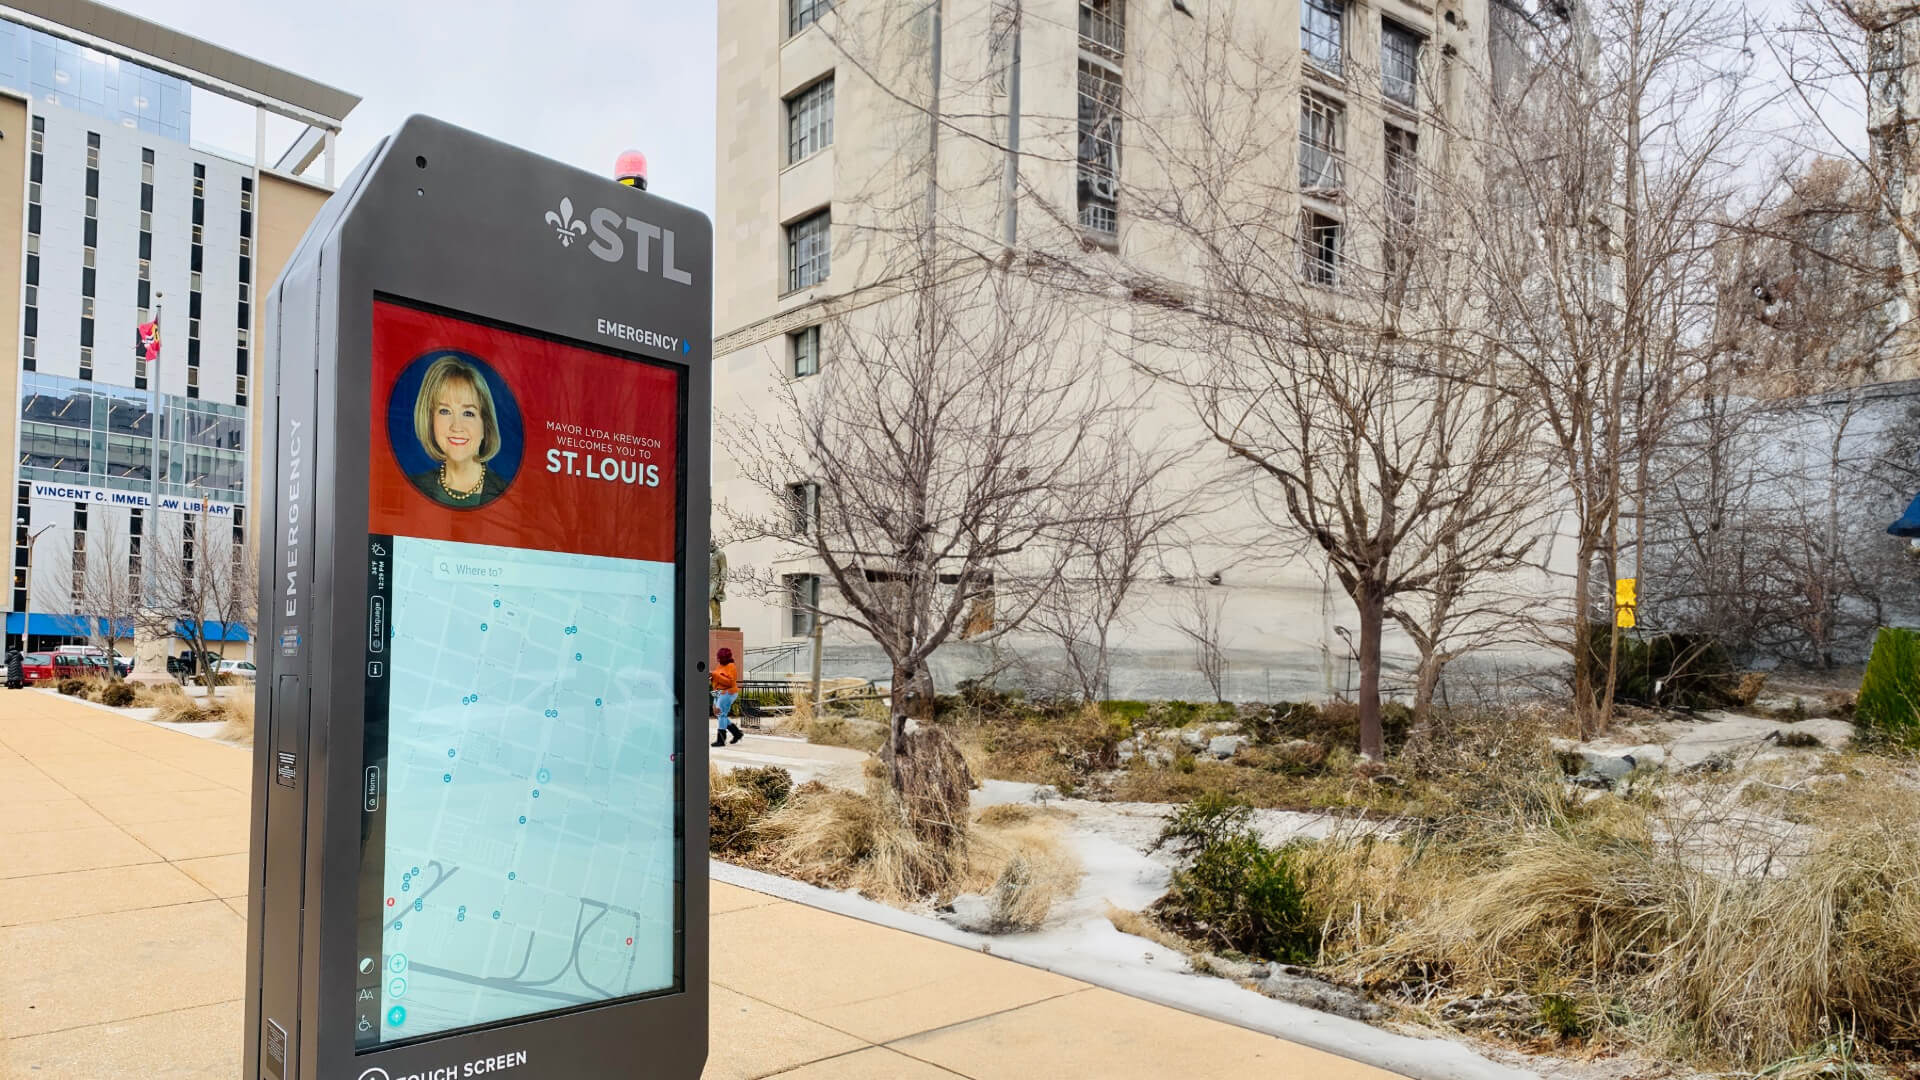   Wayfinding made easier with information kiosks in outdoor public spaces.